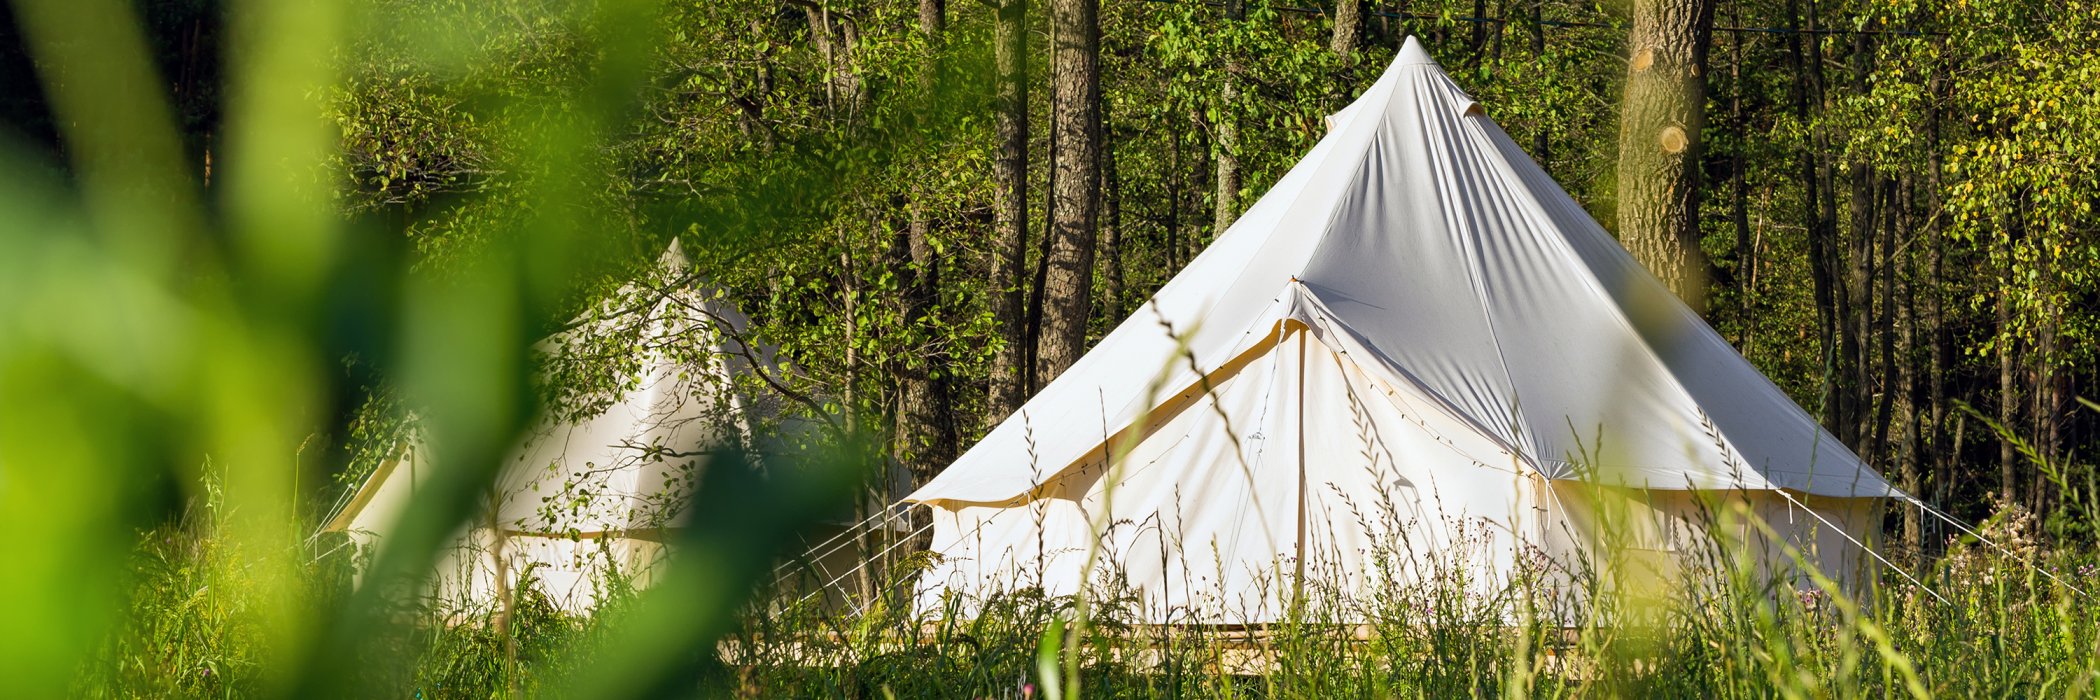 A luxury tent set back in a beautiful rural setting of green grass, trees and foliage